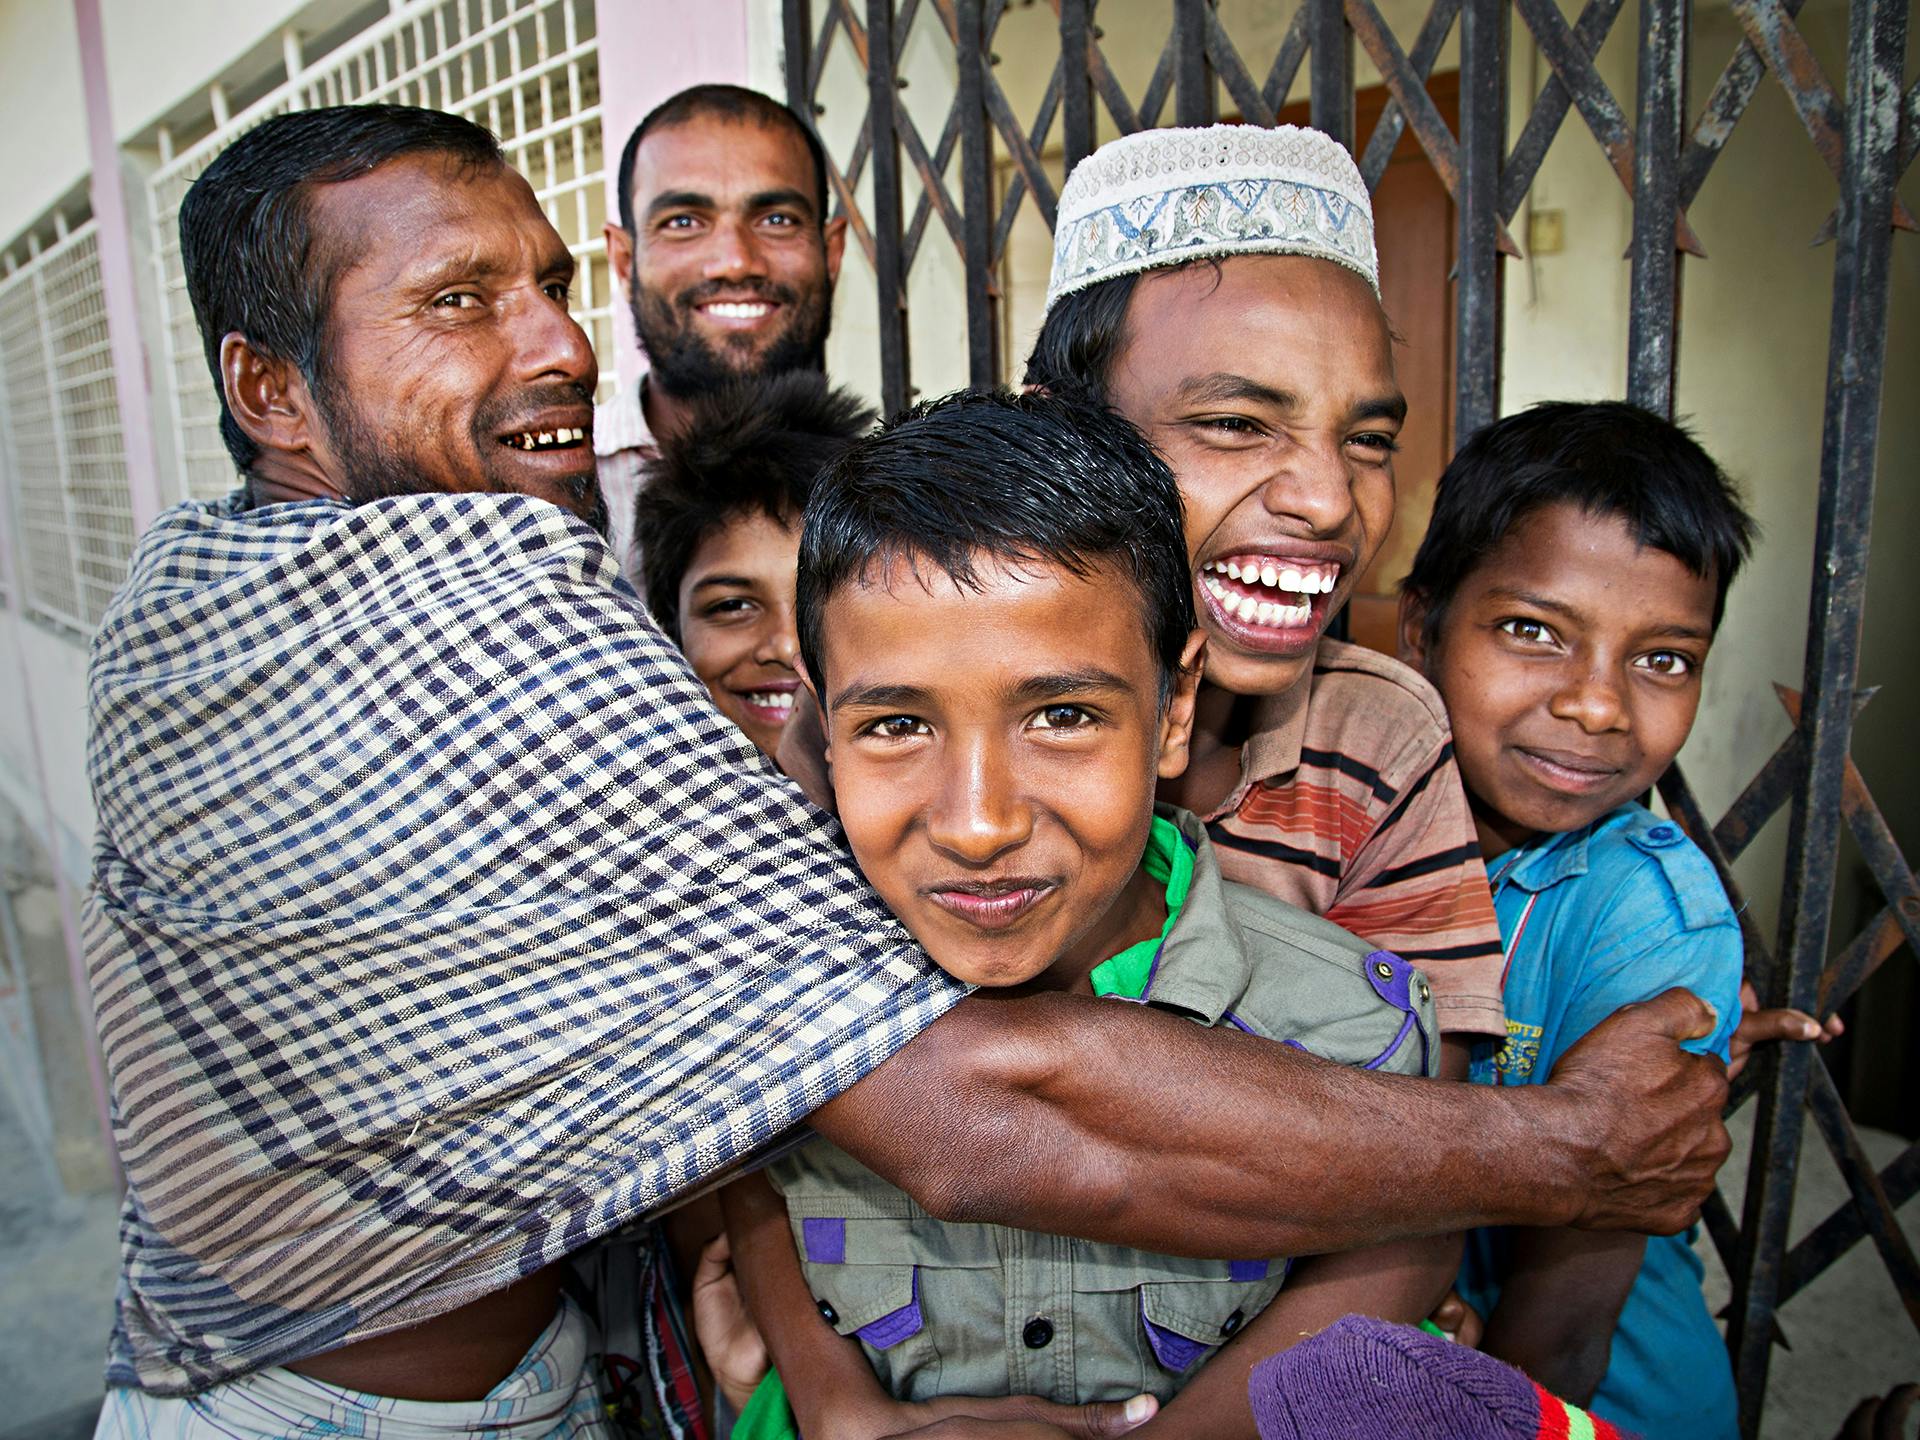 A group of adults and children hugging and smiling.